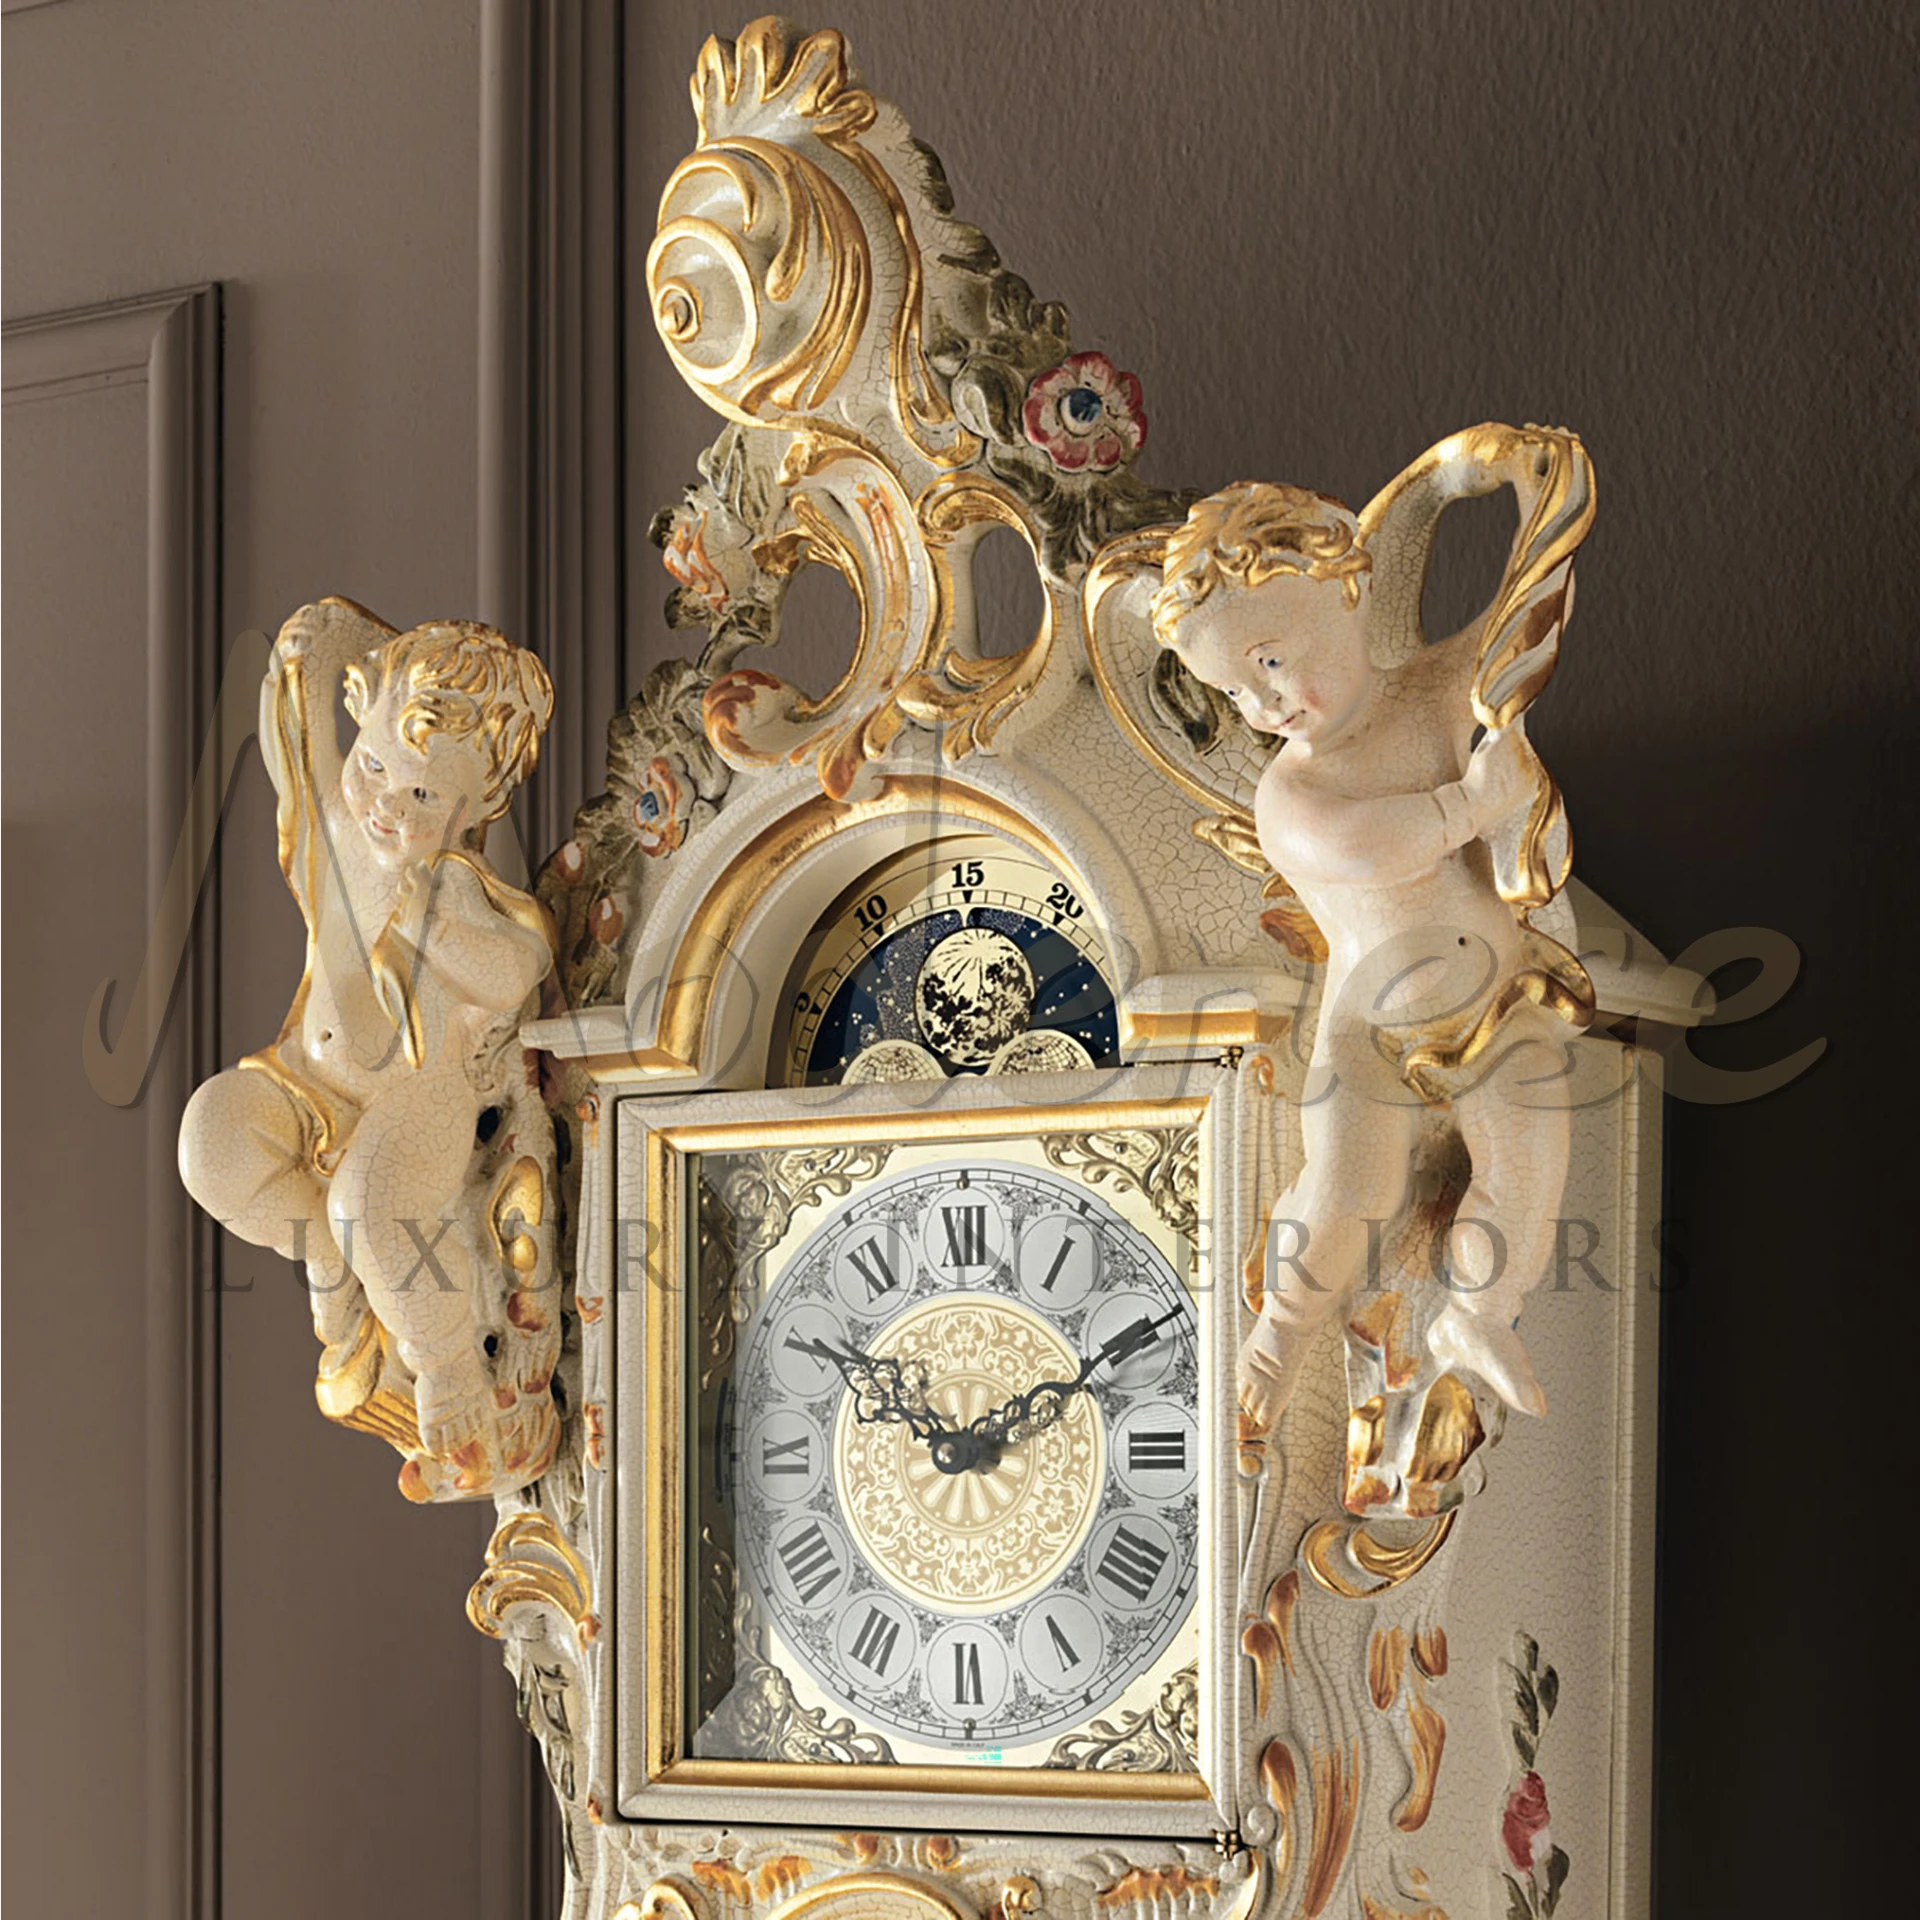 Handcrafted Baroque Grandfather Clock by Modenese with floral decorations